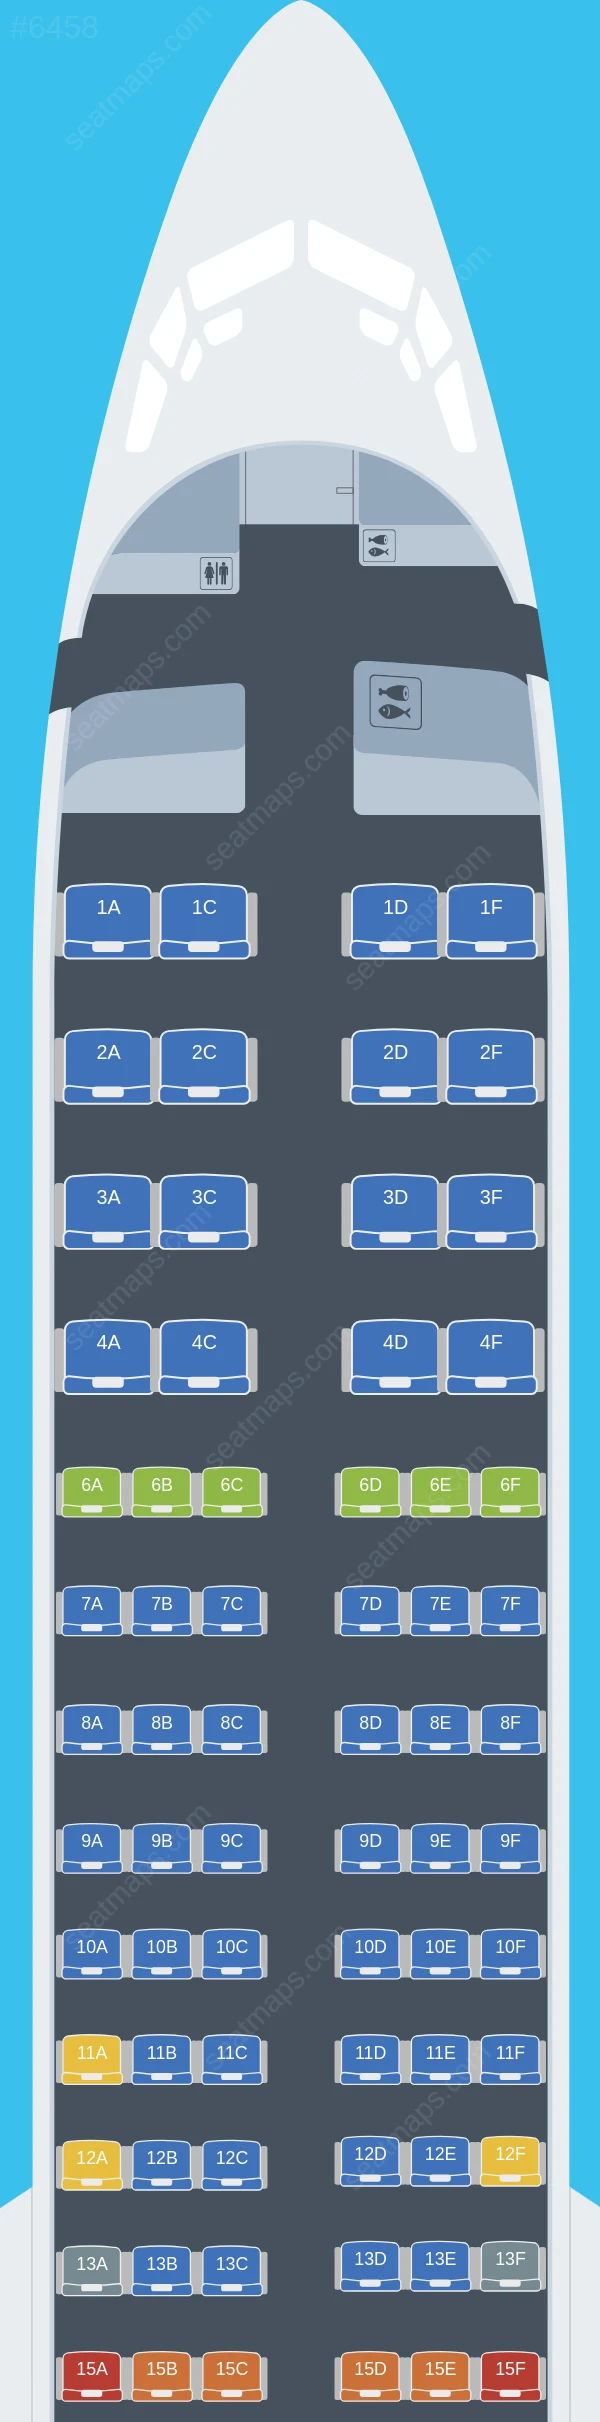 Alaska Airlines Boeing 737-900 seatmap preview